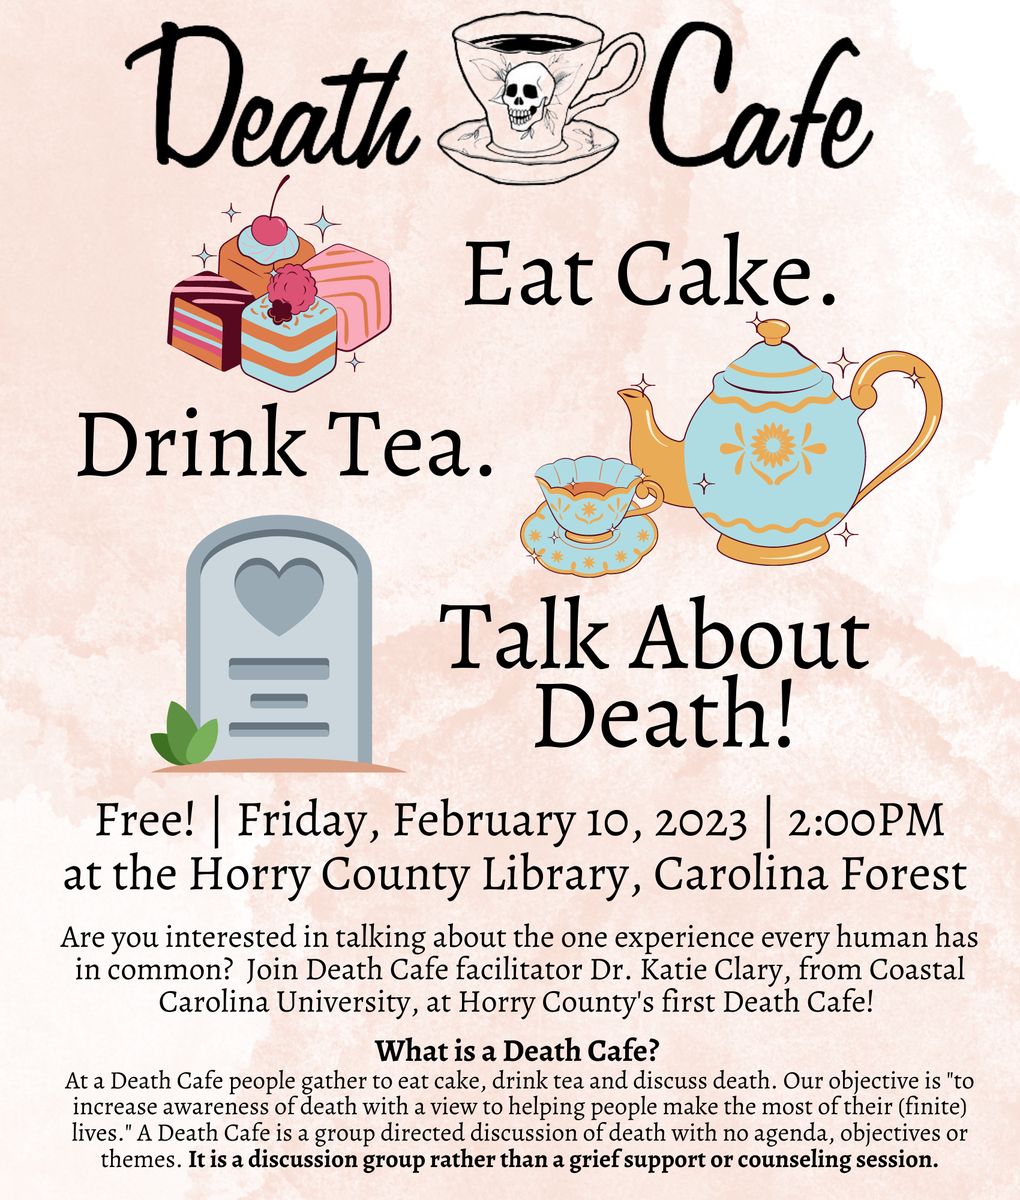 Death Cafe of Horry County